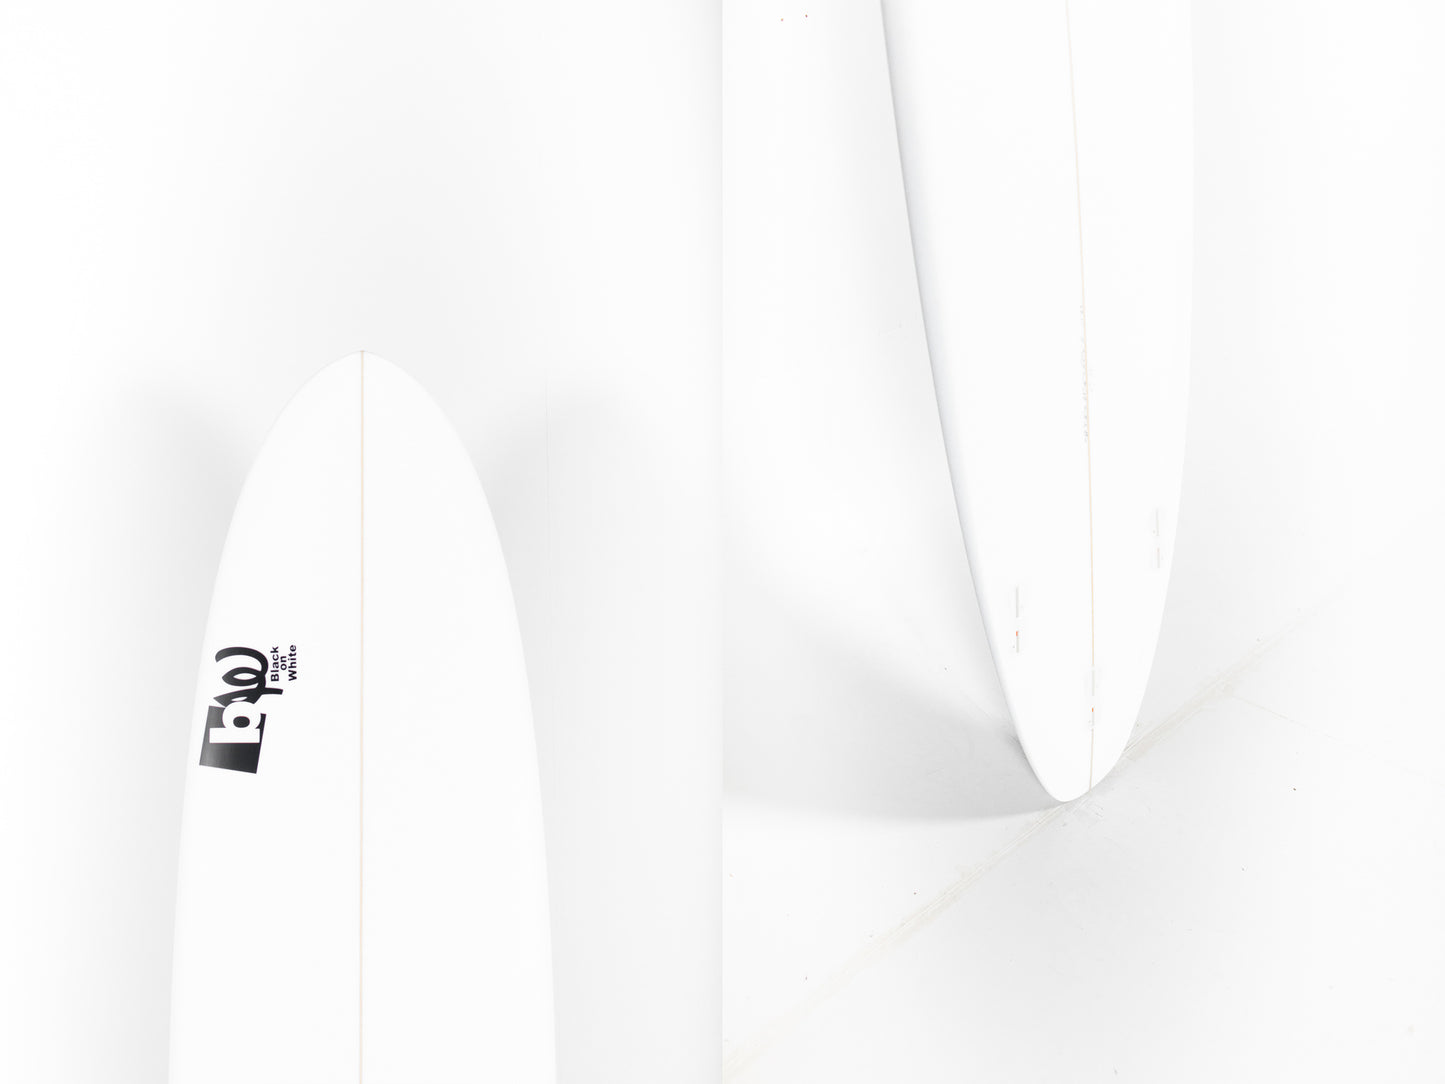 
                  
                    BW SURFBOARDS - BW SURFBOARDS Evolutivo 7'2" x 21 1/2 x 2 3/4 x 51.7L. at PUKAS SURF SHOP
                  
                